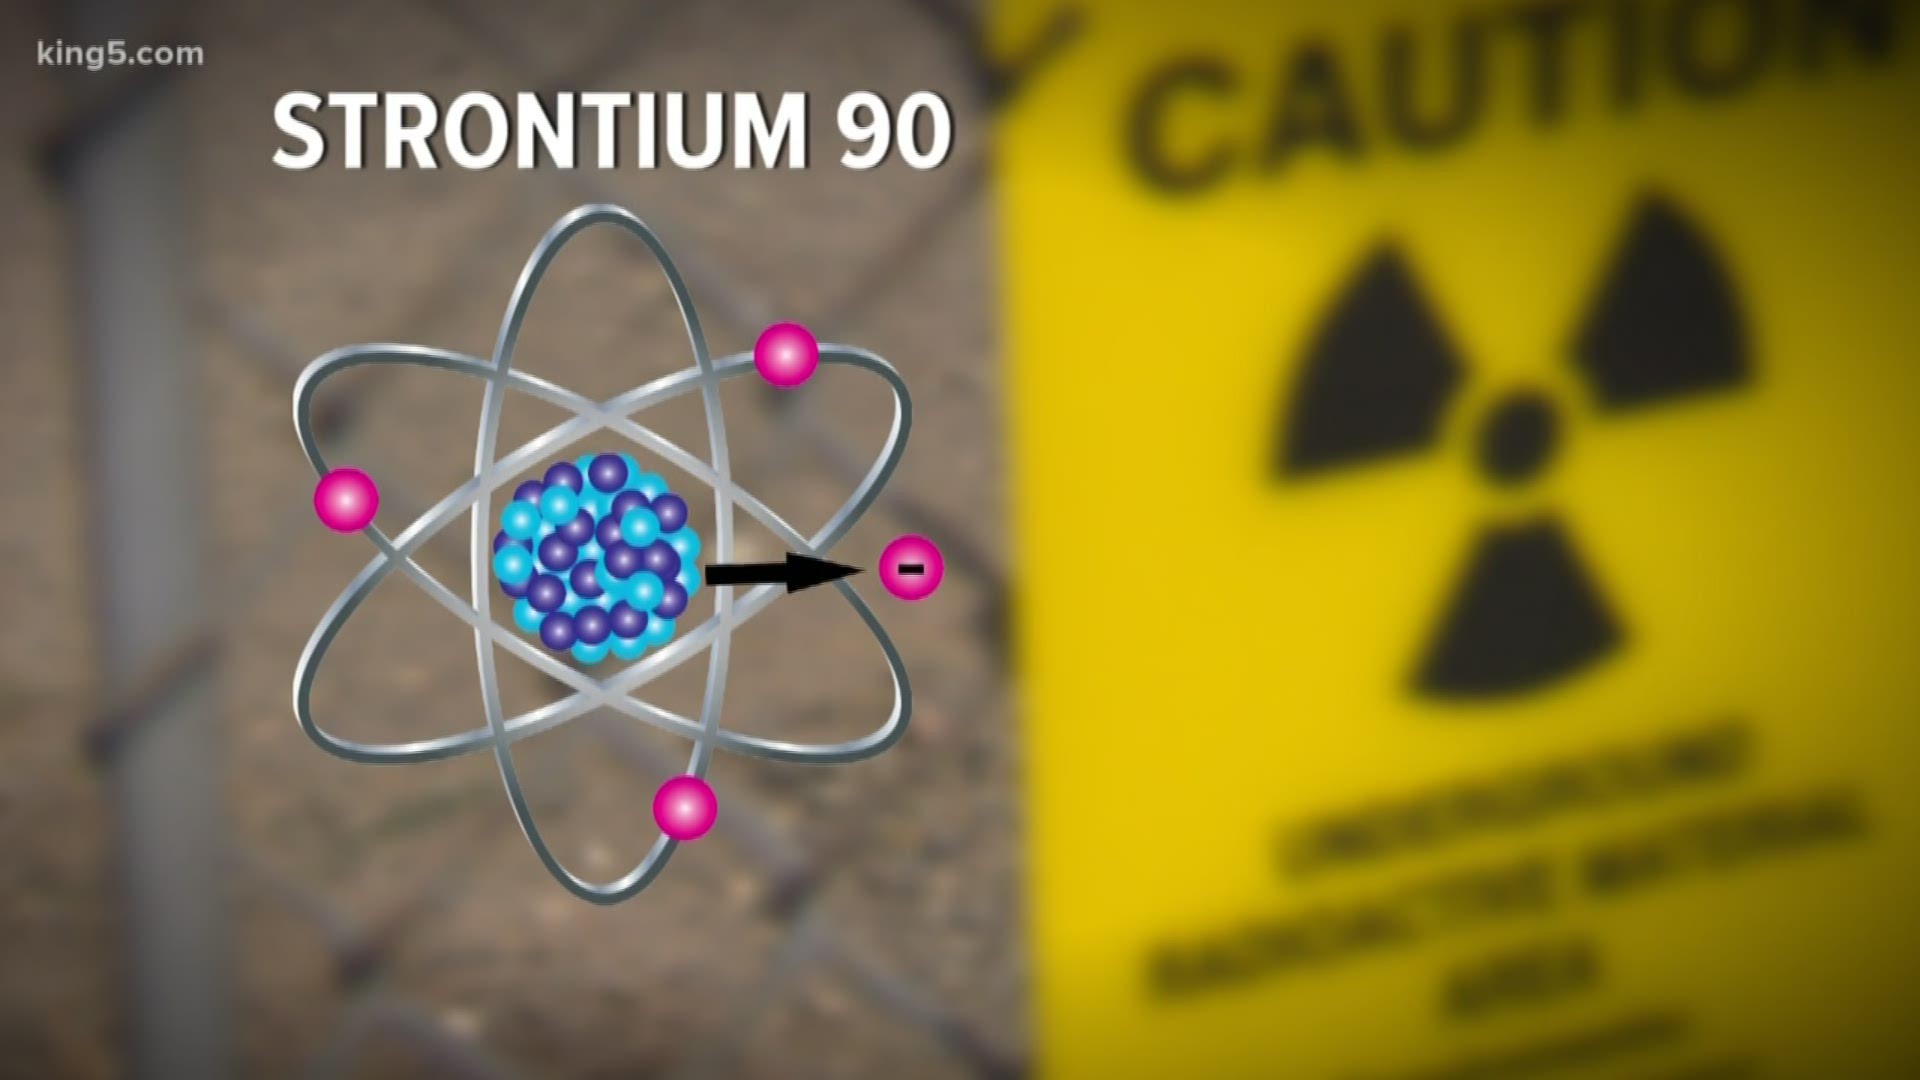 Two contamination events have occurred at the Hanford Nuclear site in Eastern Washington while employees of government contractor CH2M Hill were working on the most radioactive building on the reservation. KING 5 Investigator Susannah Frame exposes the matter.